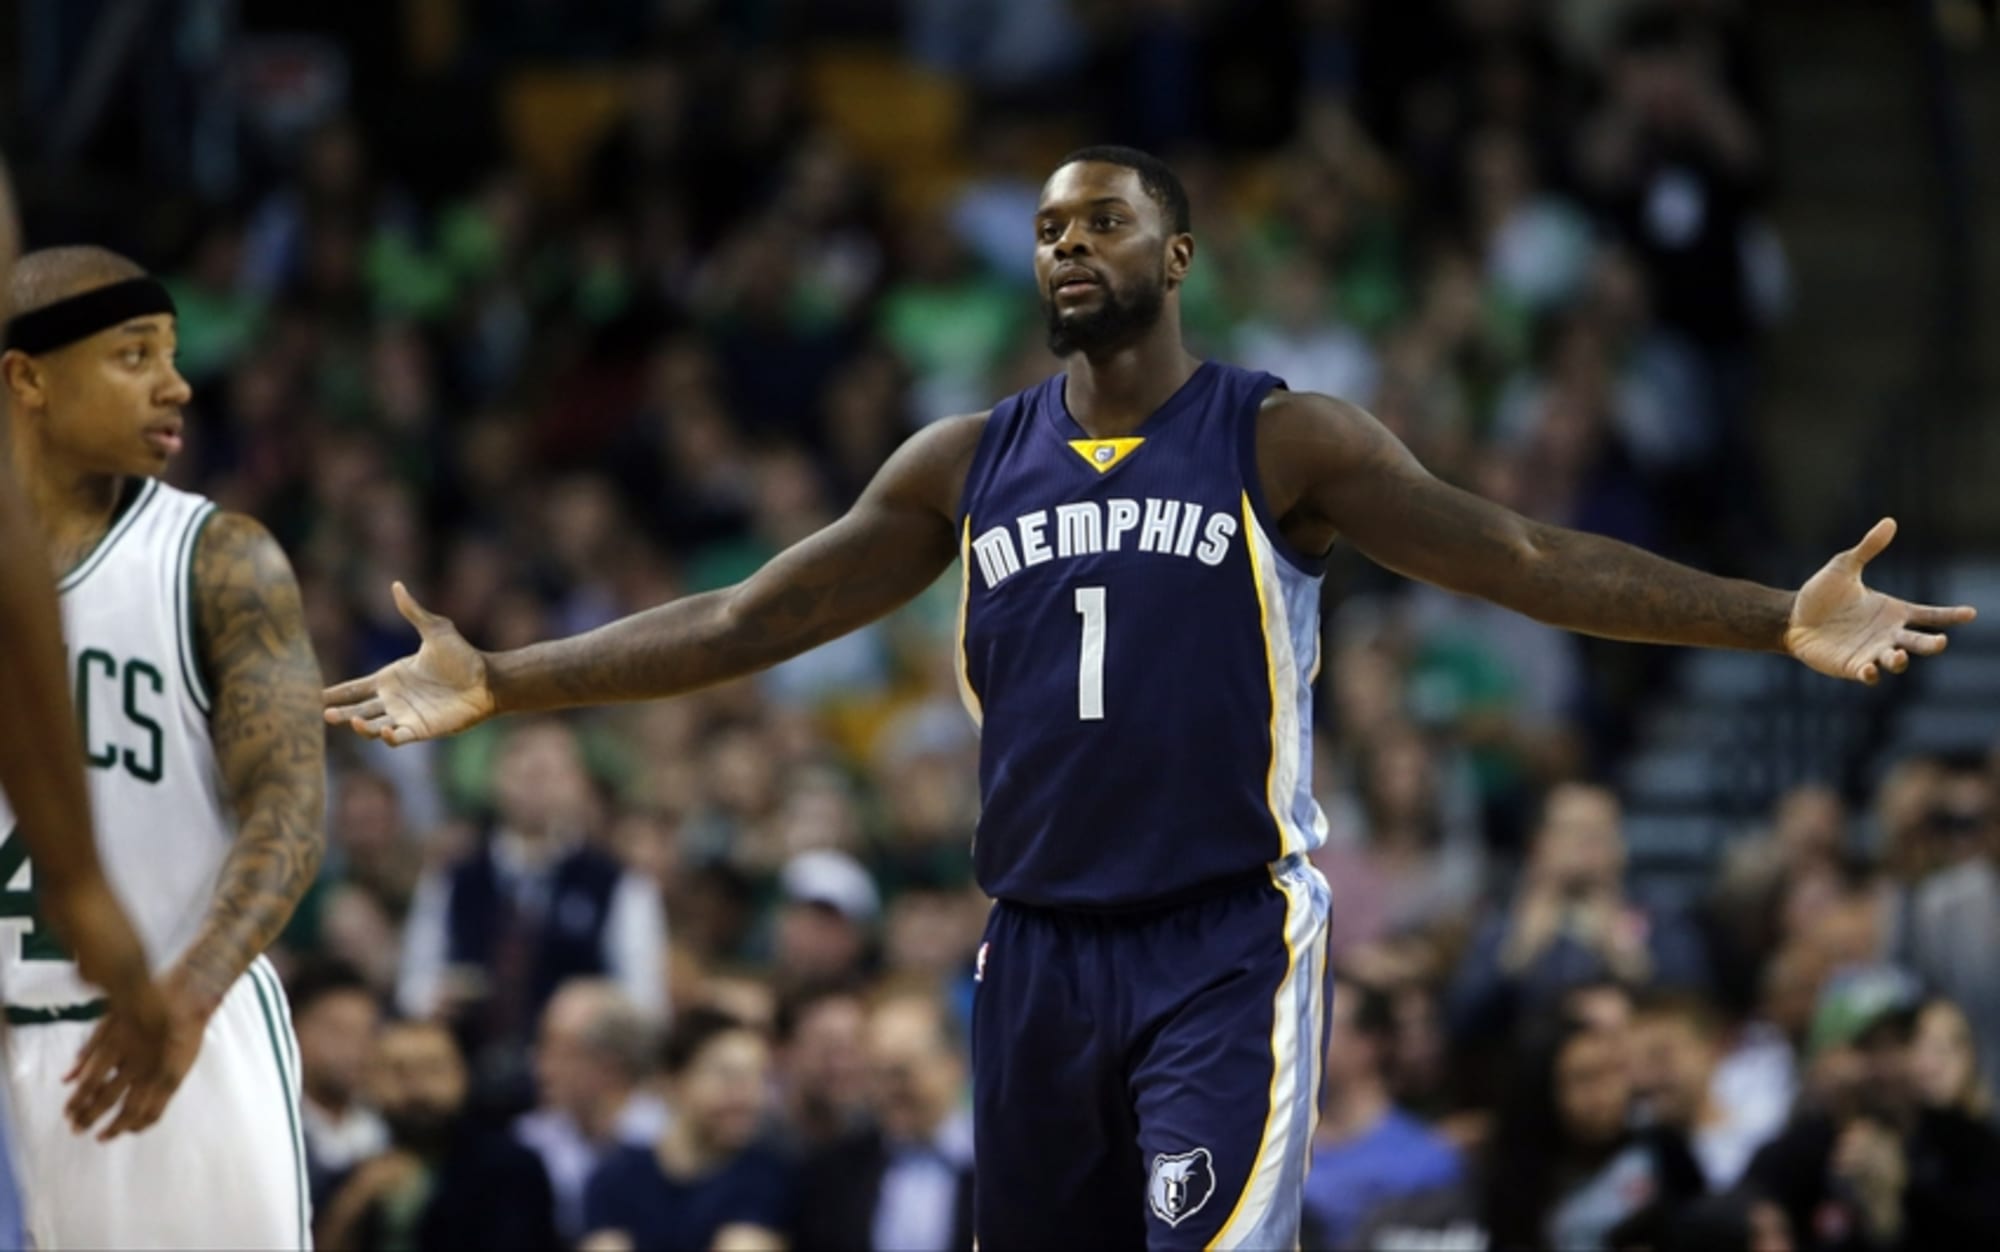 Sources: Clippers acquire Hornets' Lance Stephenson